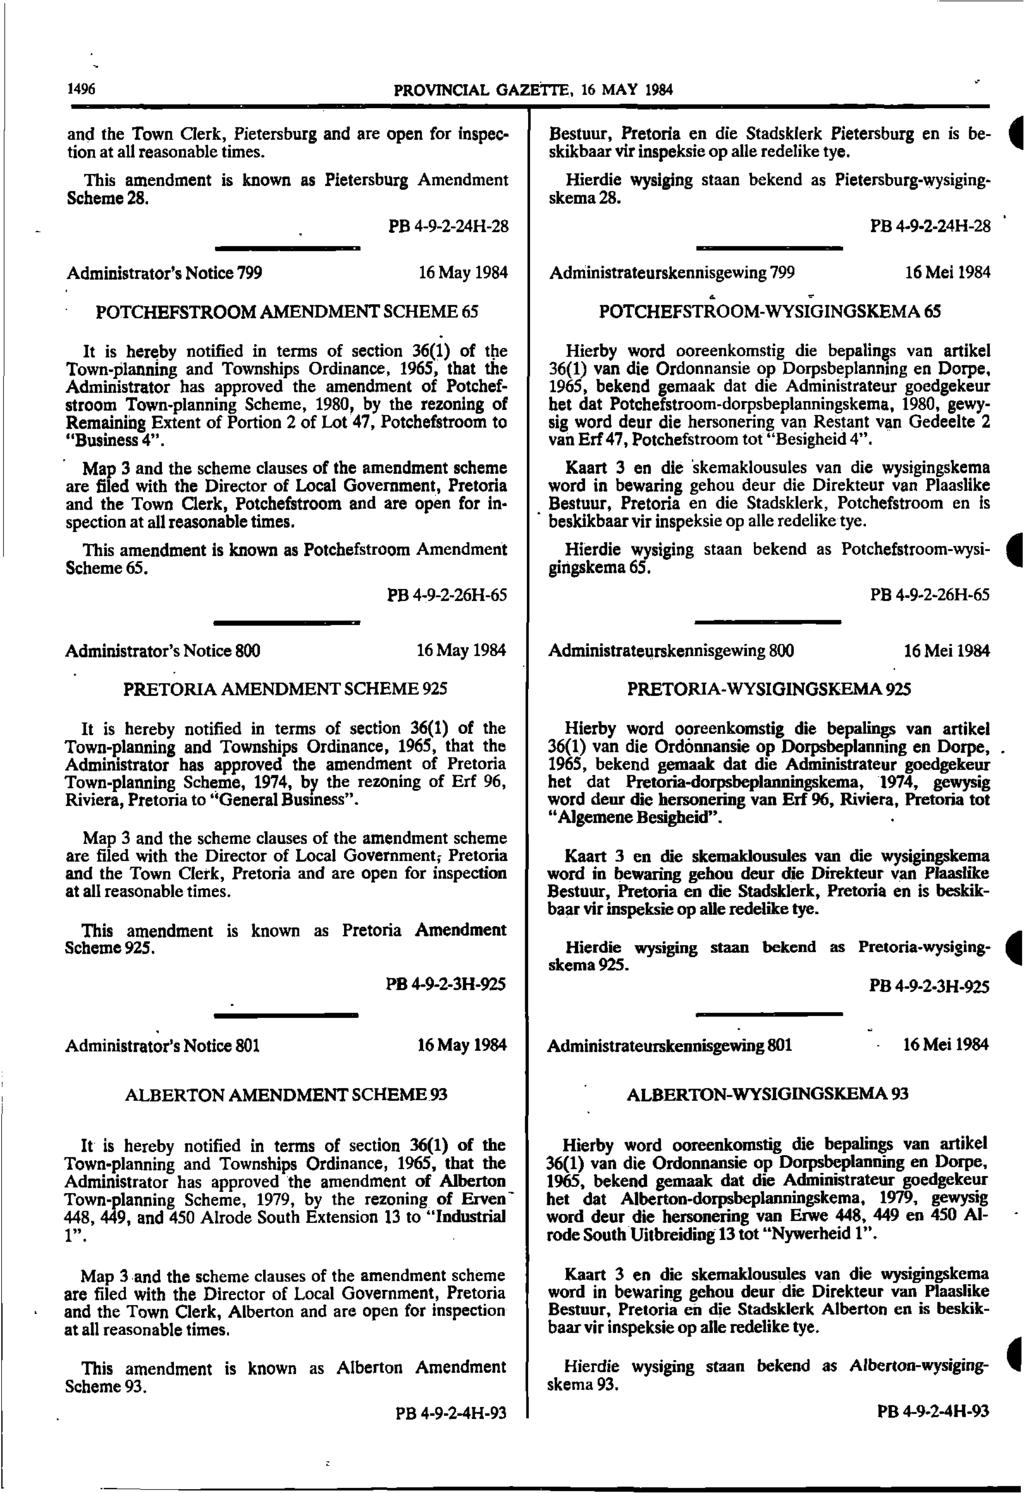 1496 PROVINCIAL GAZETTE, 16 MAY 1984 and the Town Clerk, Pietersburg and are open for inspection at all reasonable times. This amendment is known as Pietersburg Amendment Scheme 28.